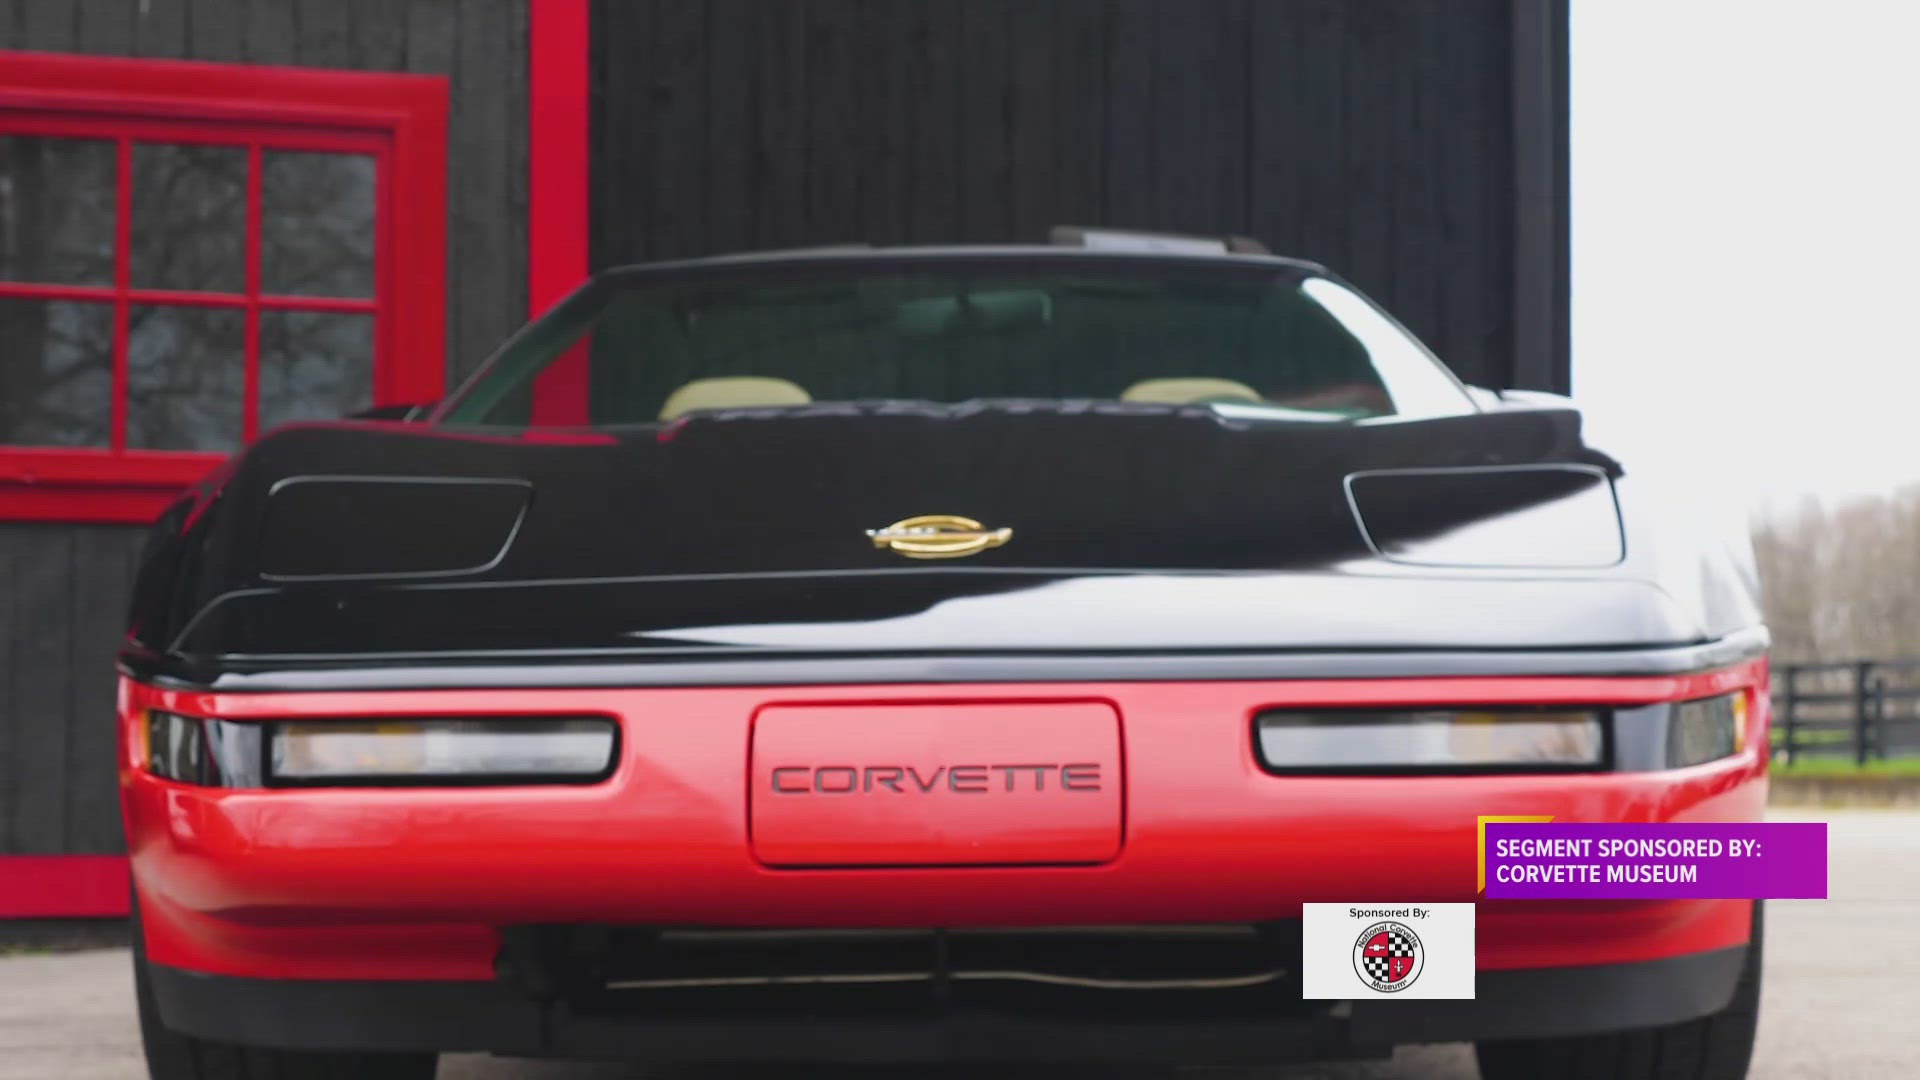 The Corvette Museum has many to offer guests this summer and you need to plan your trip there!